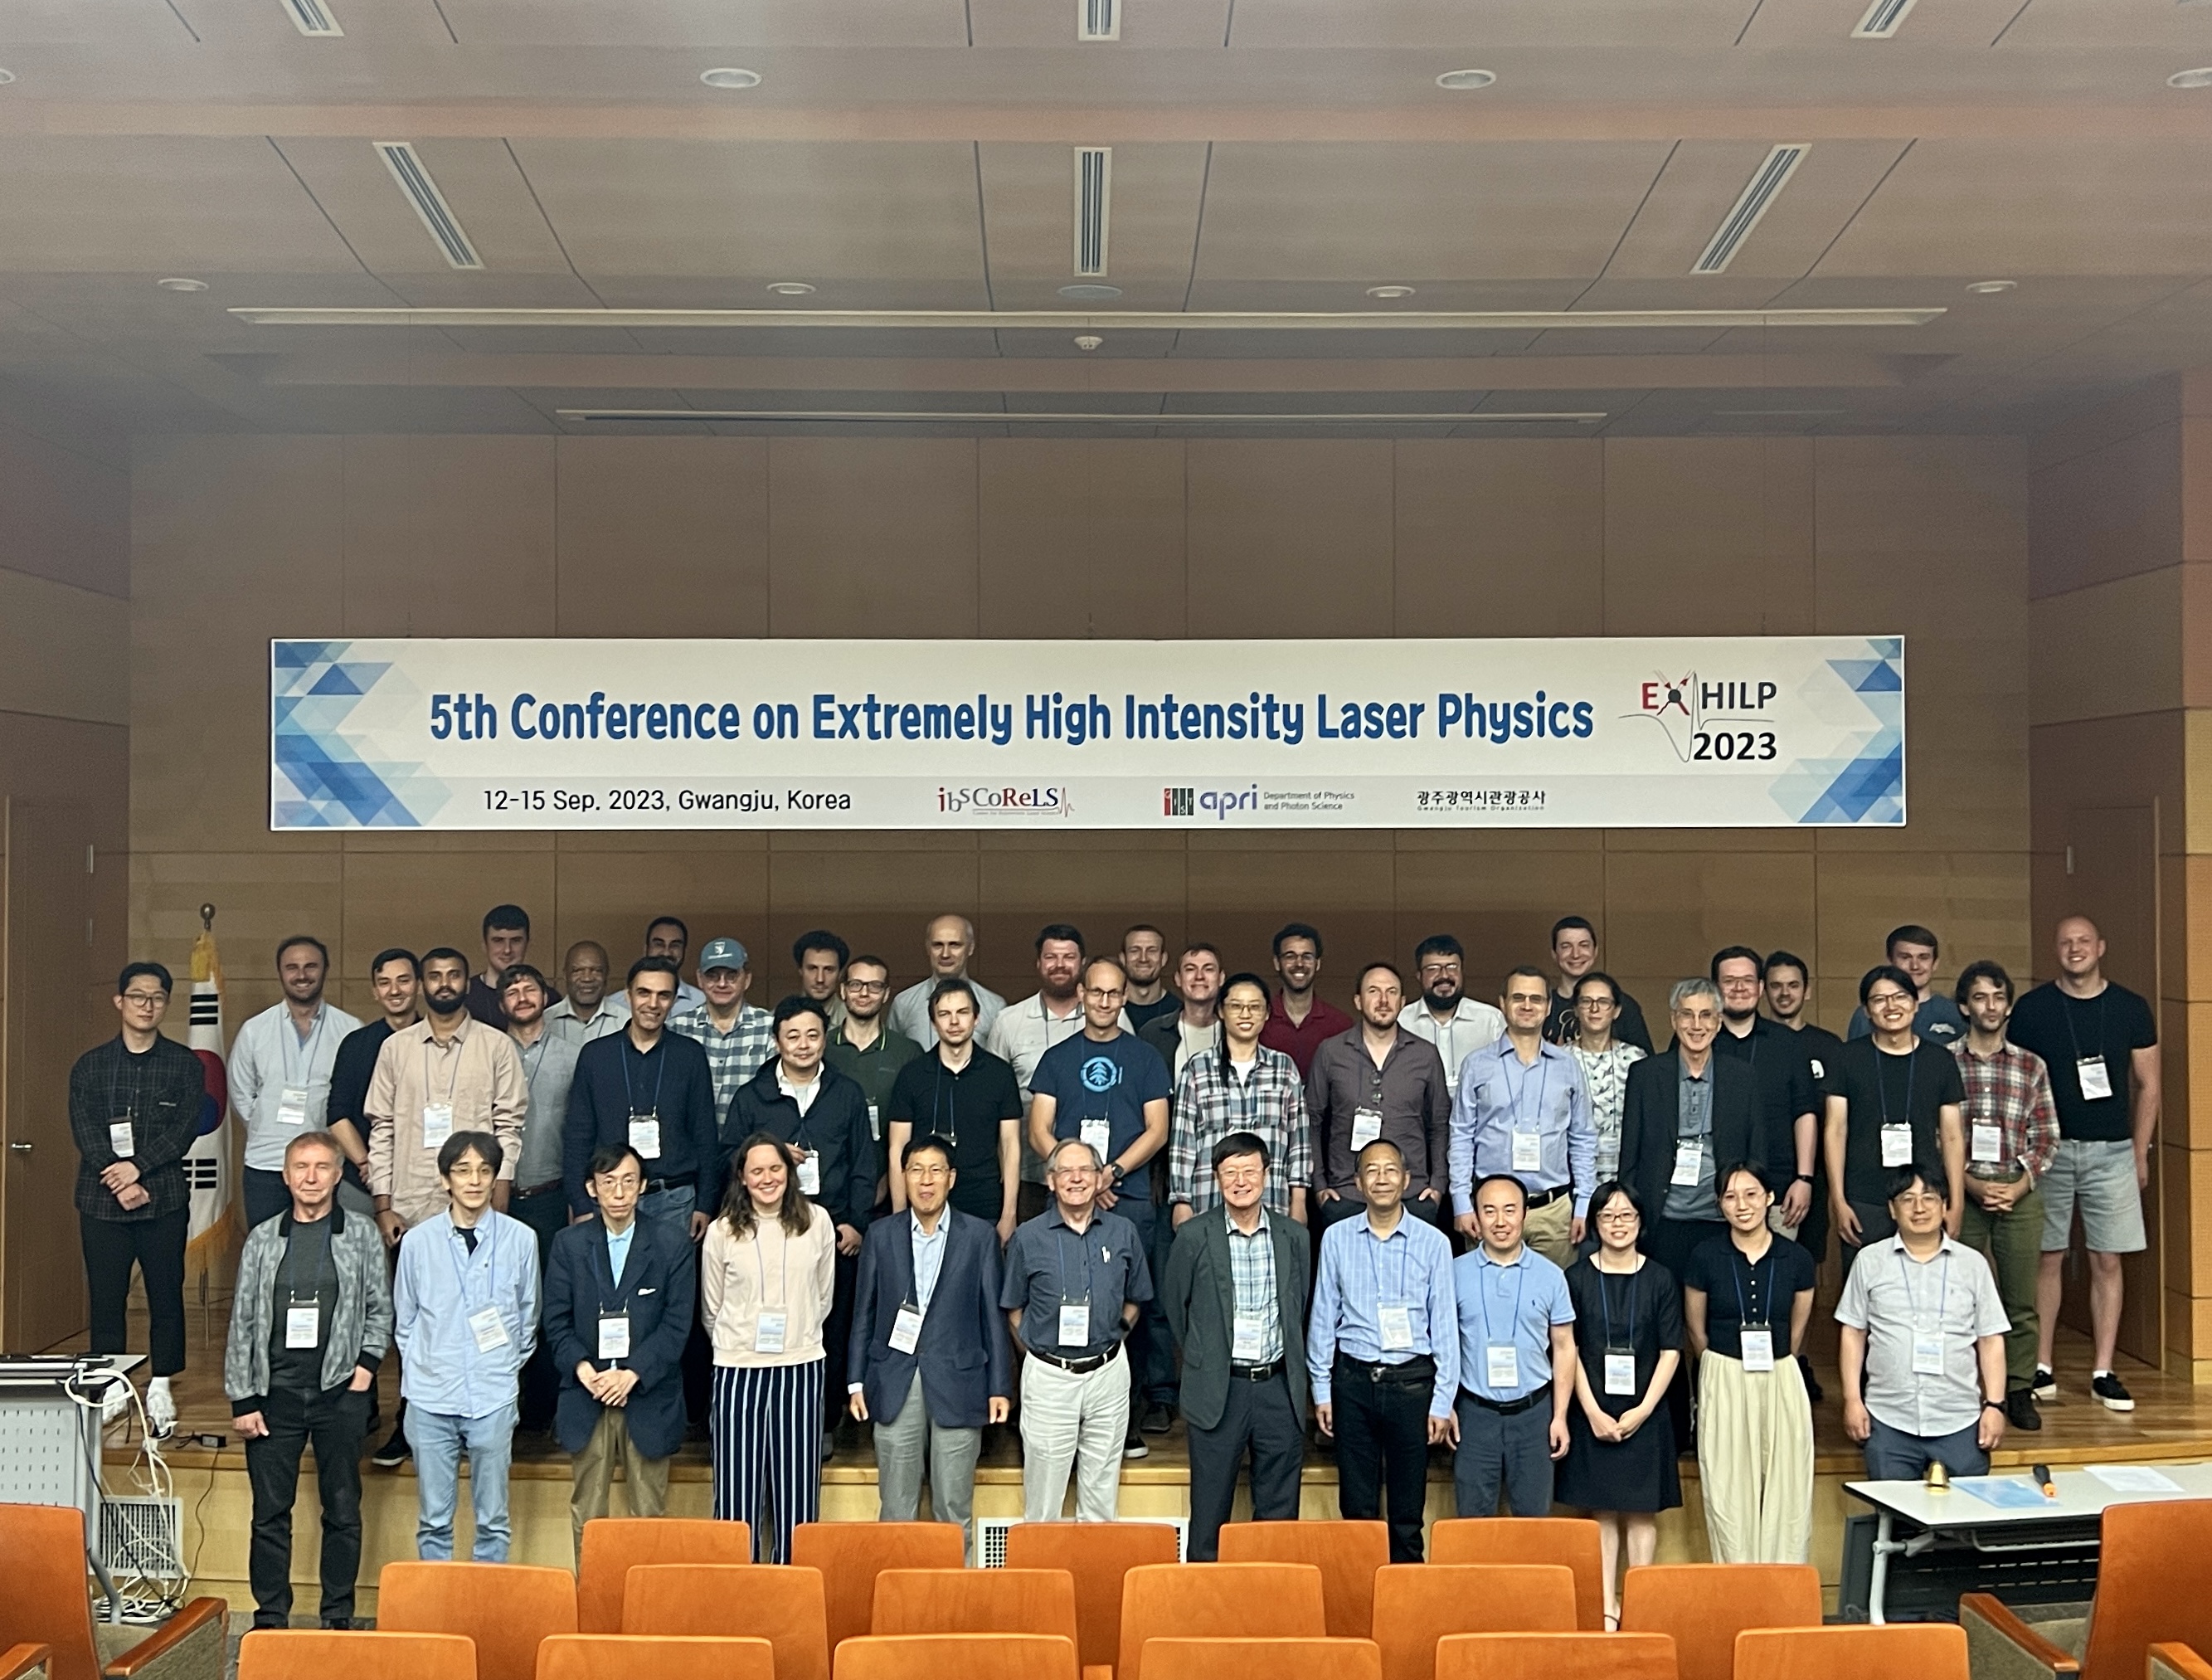 HPLSE at the 5th Conference on Extremely High Intensity Laser Physics